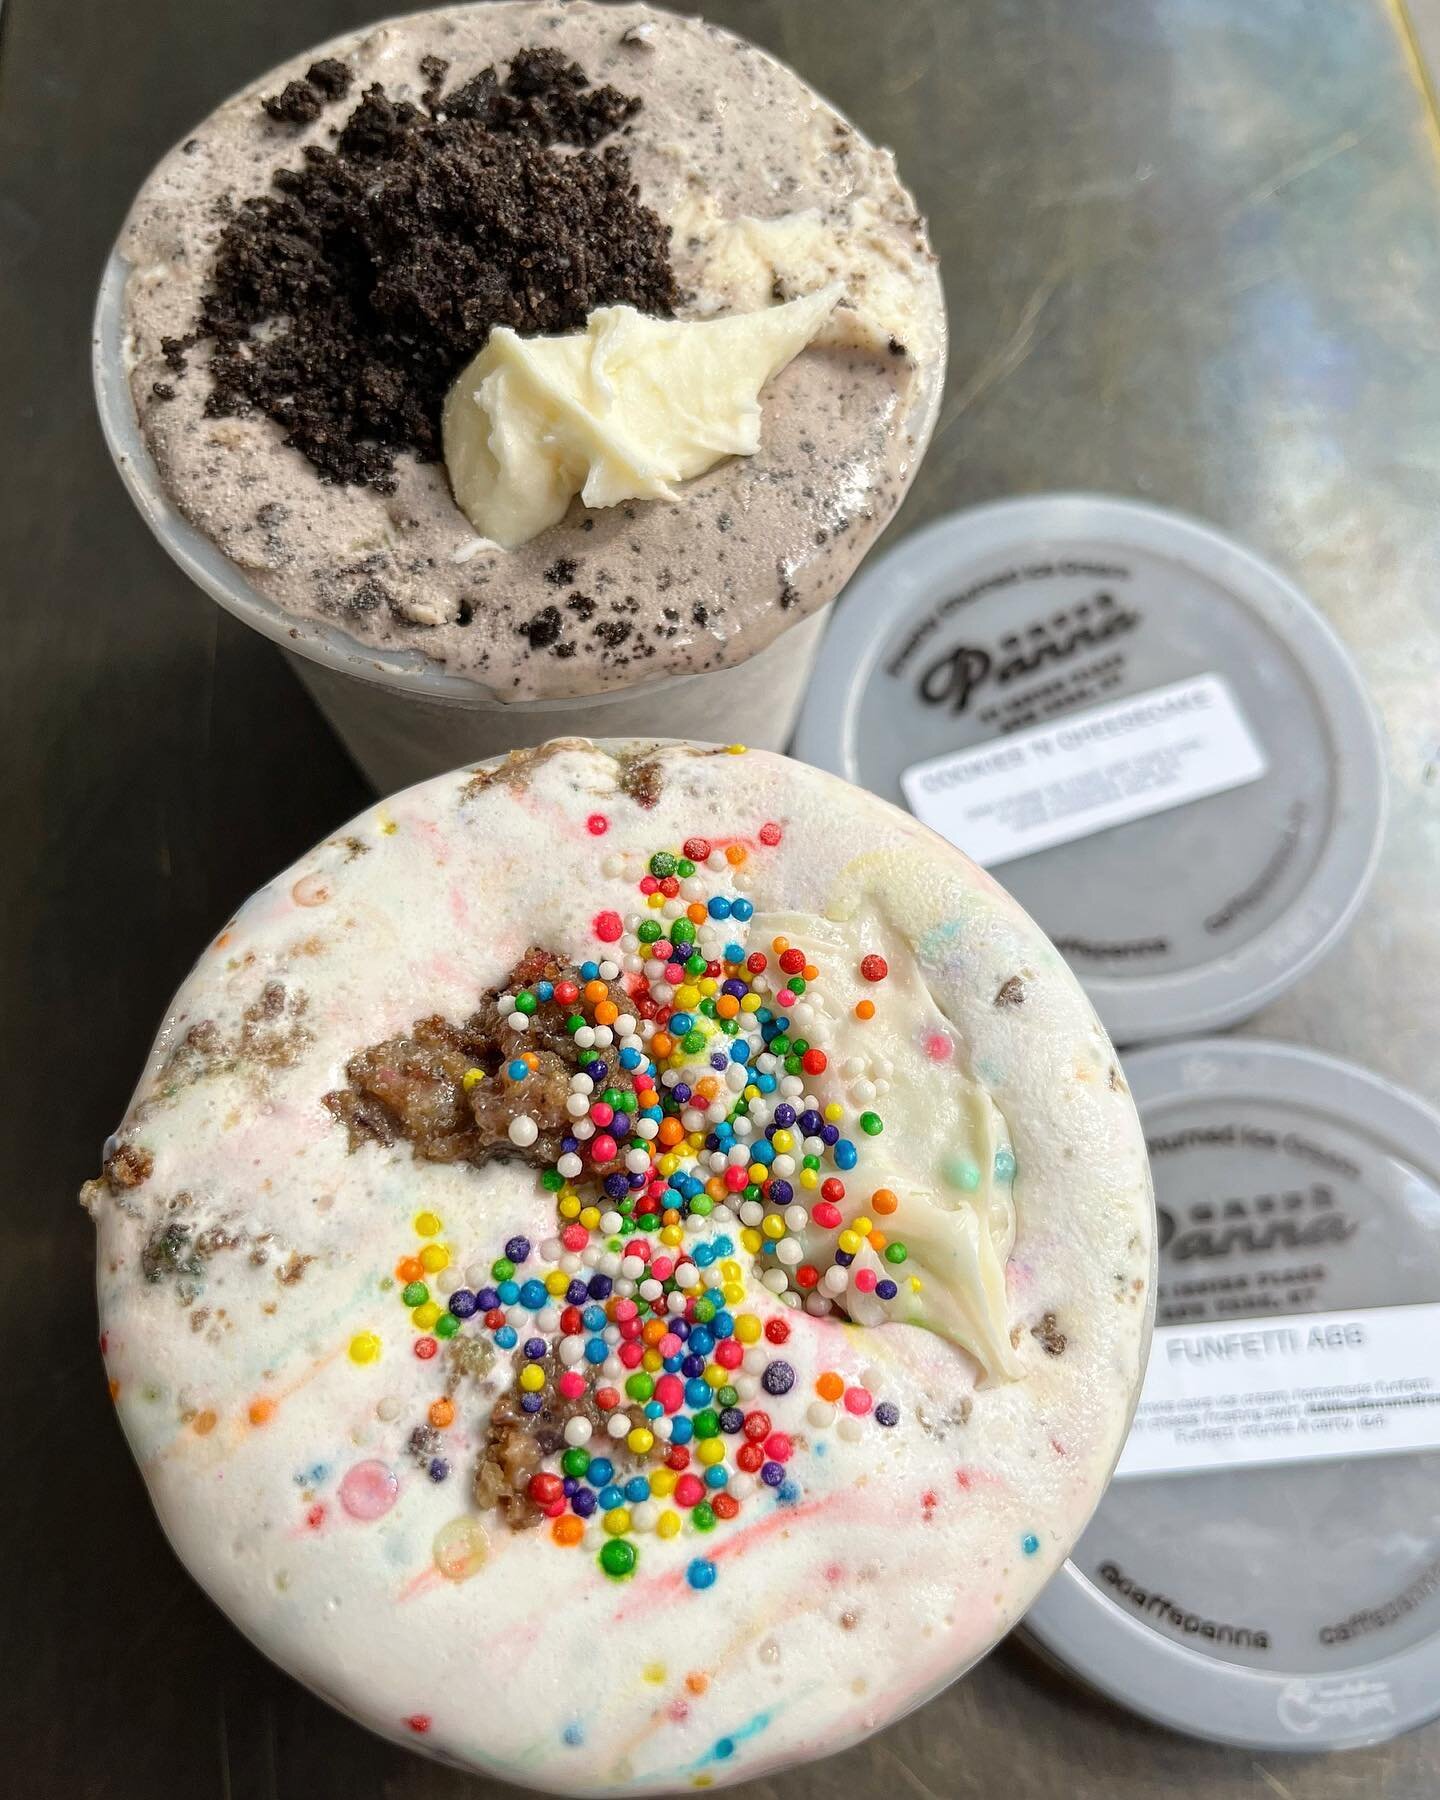 🧁💕🍌🤍🖤2 EXTREME Panna People Pleaser Pints today &amp; lots others online at 1:30 for pickup or delivery🤎

**Reminder that scoops are closed today, but normal service resumes tomorrow**🤎 #PANNAPINT